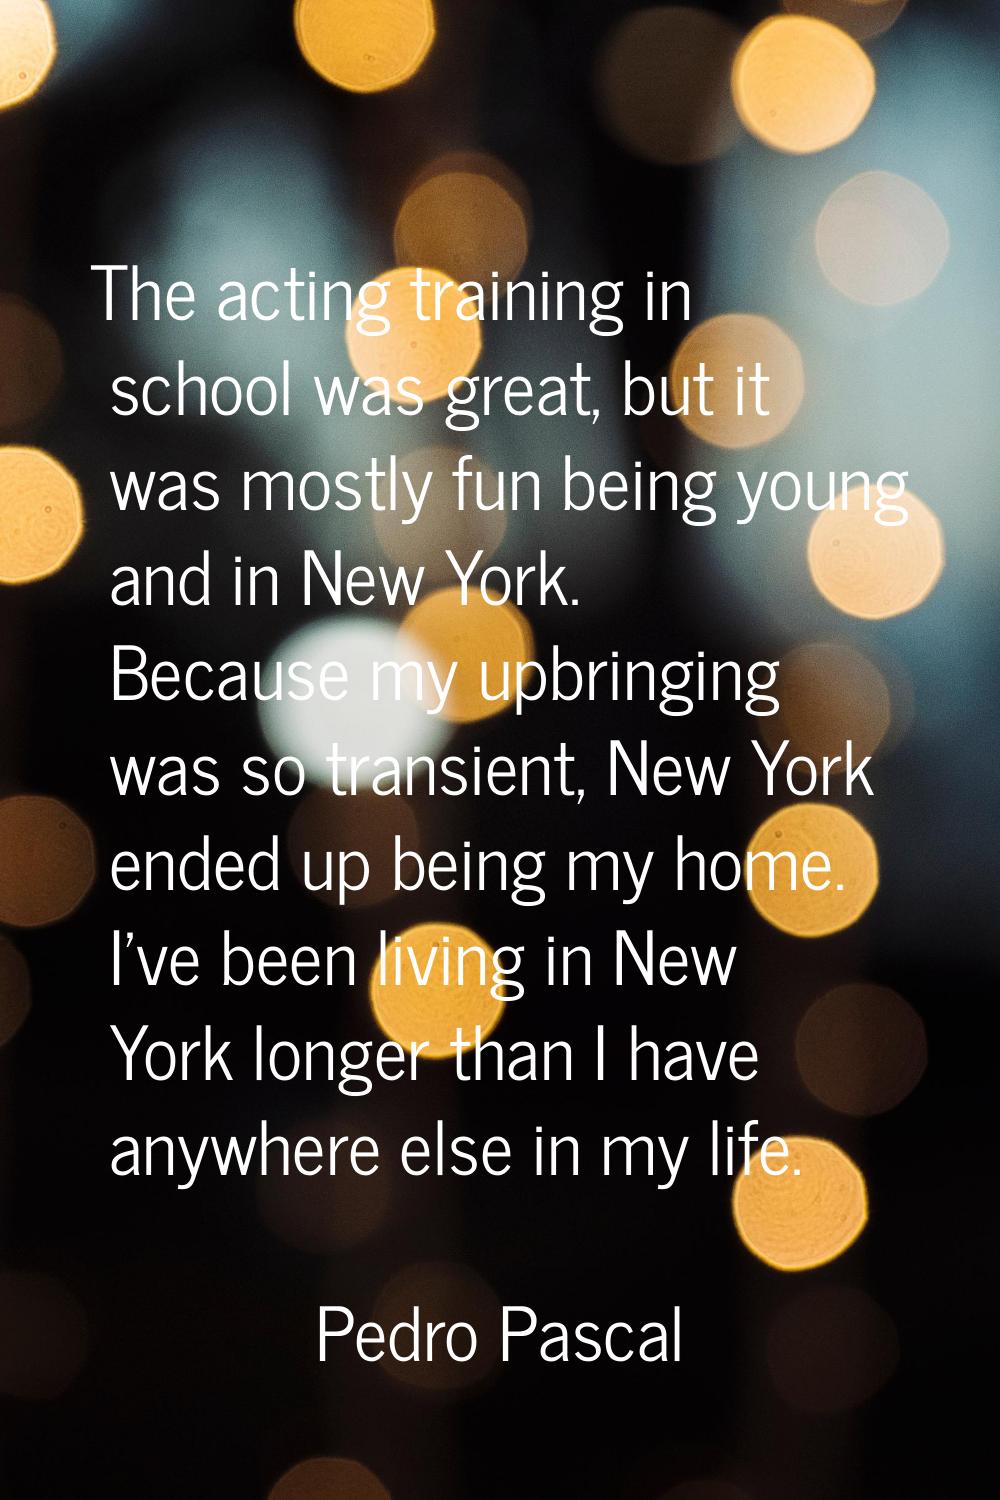 The acting training in school was great, but it was mostly fun being young and in New York. Because